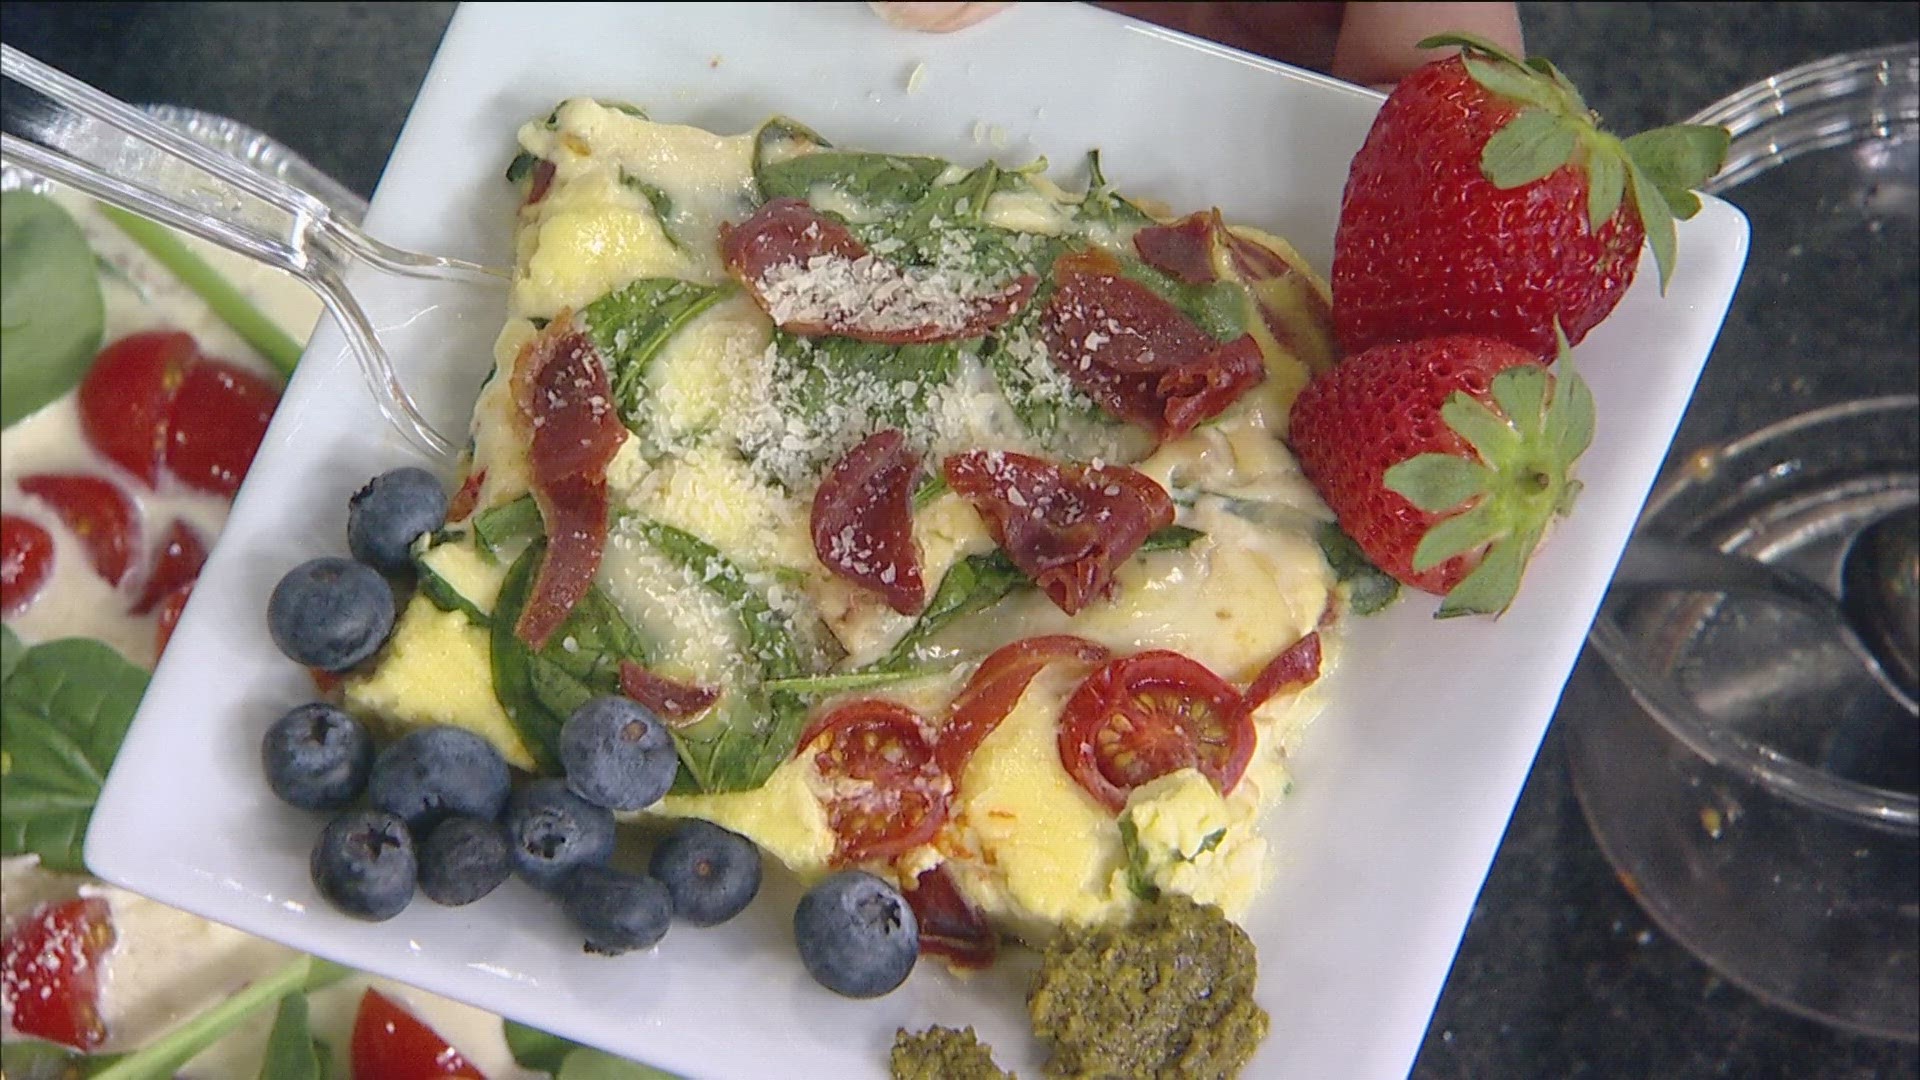 Looking for an innovative Easter dish? Try out this healthy egg recipe.